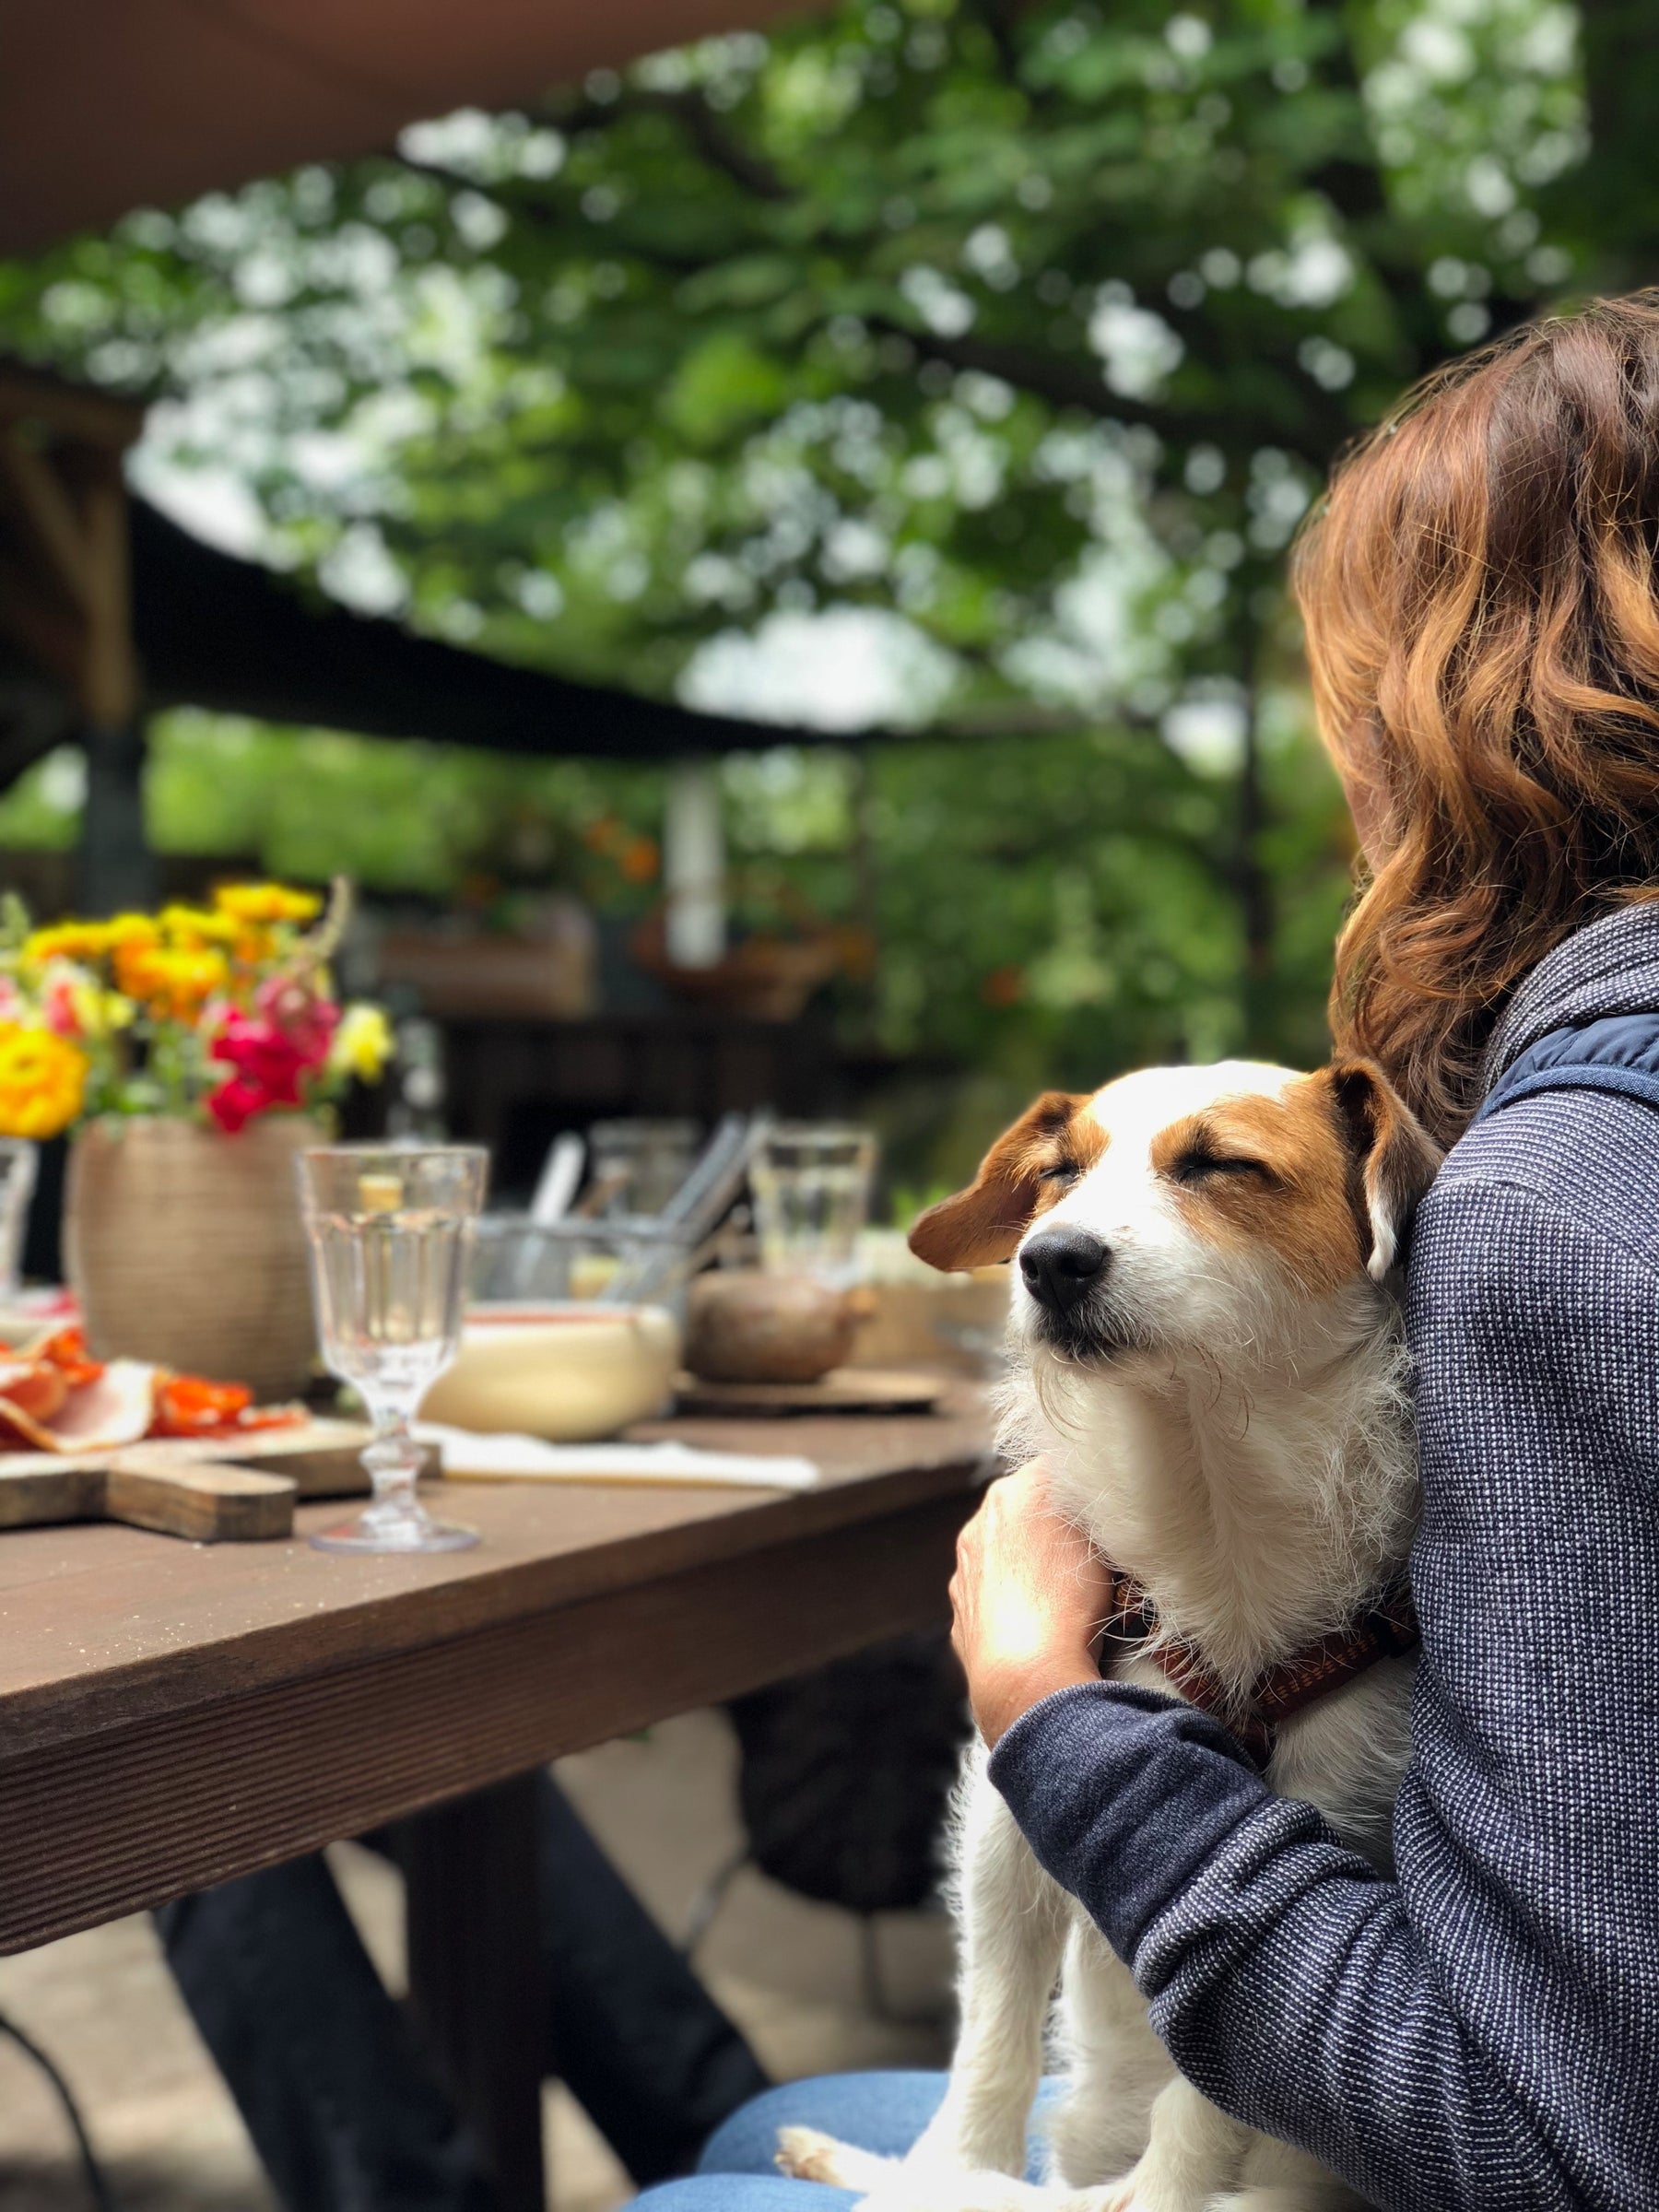 7 Pet-Friendly Cafes in Delhi NCR to Spend Quality Time with Your Pets